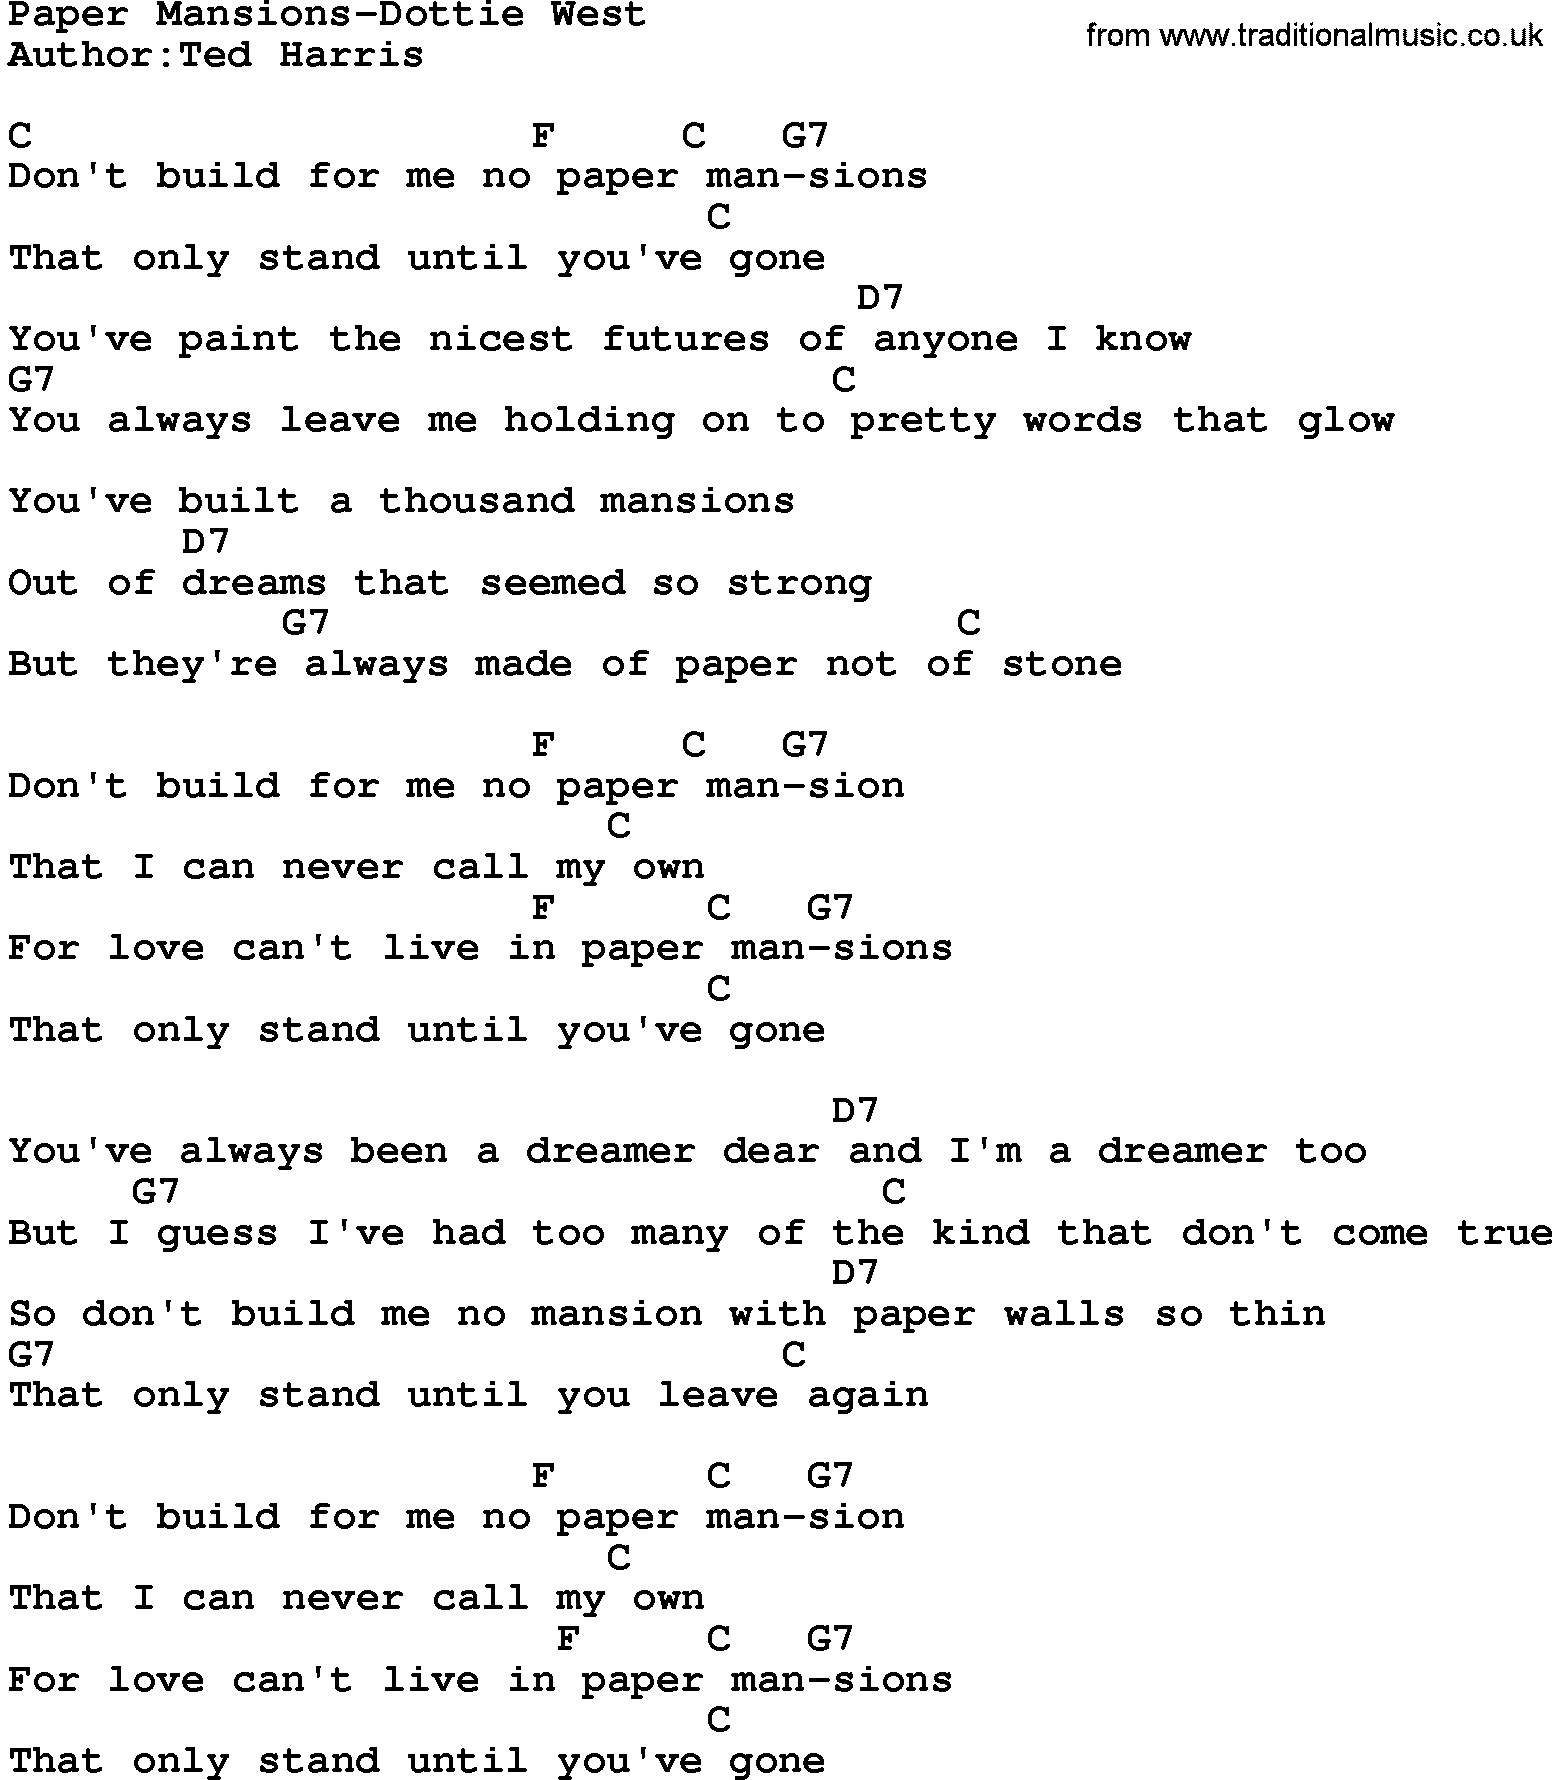 Country music song: Paper Mansions-Dottie West lyrics and chords